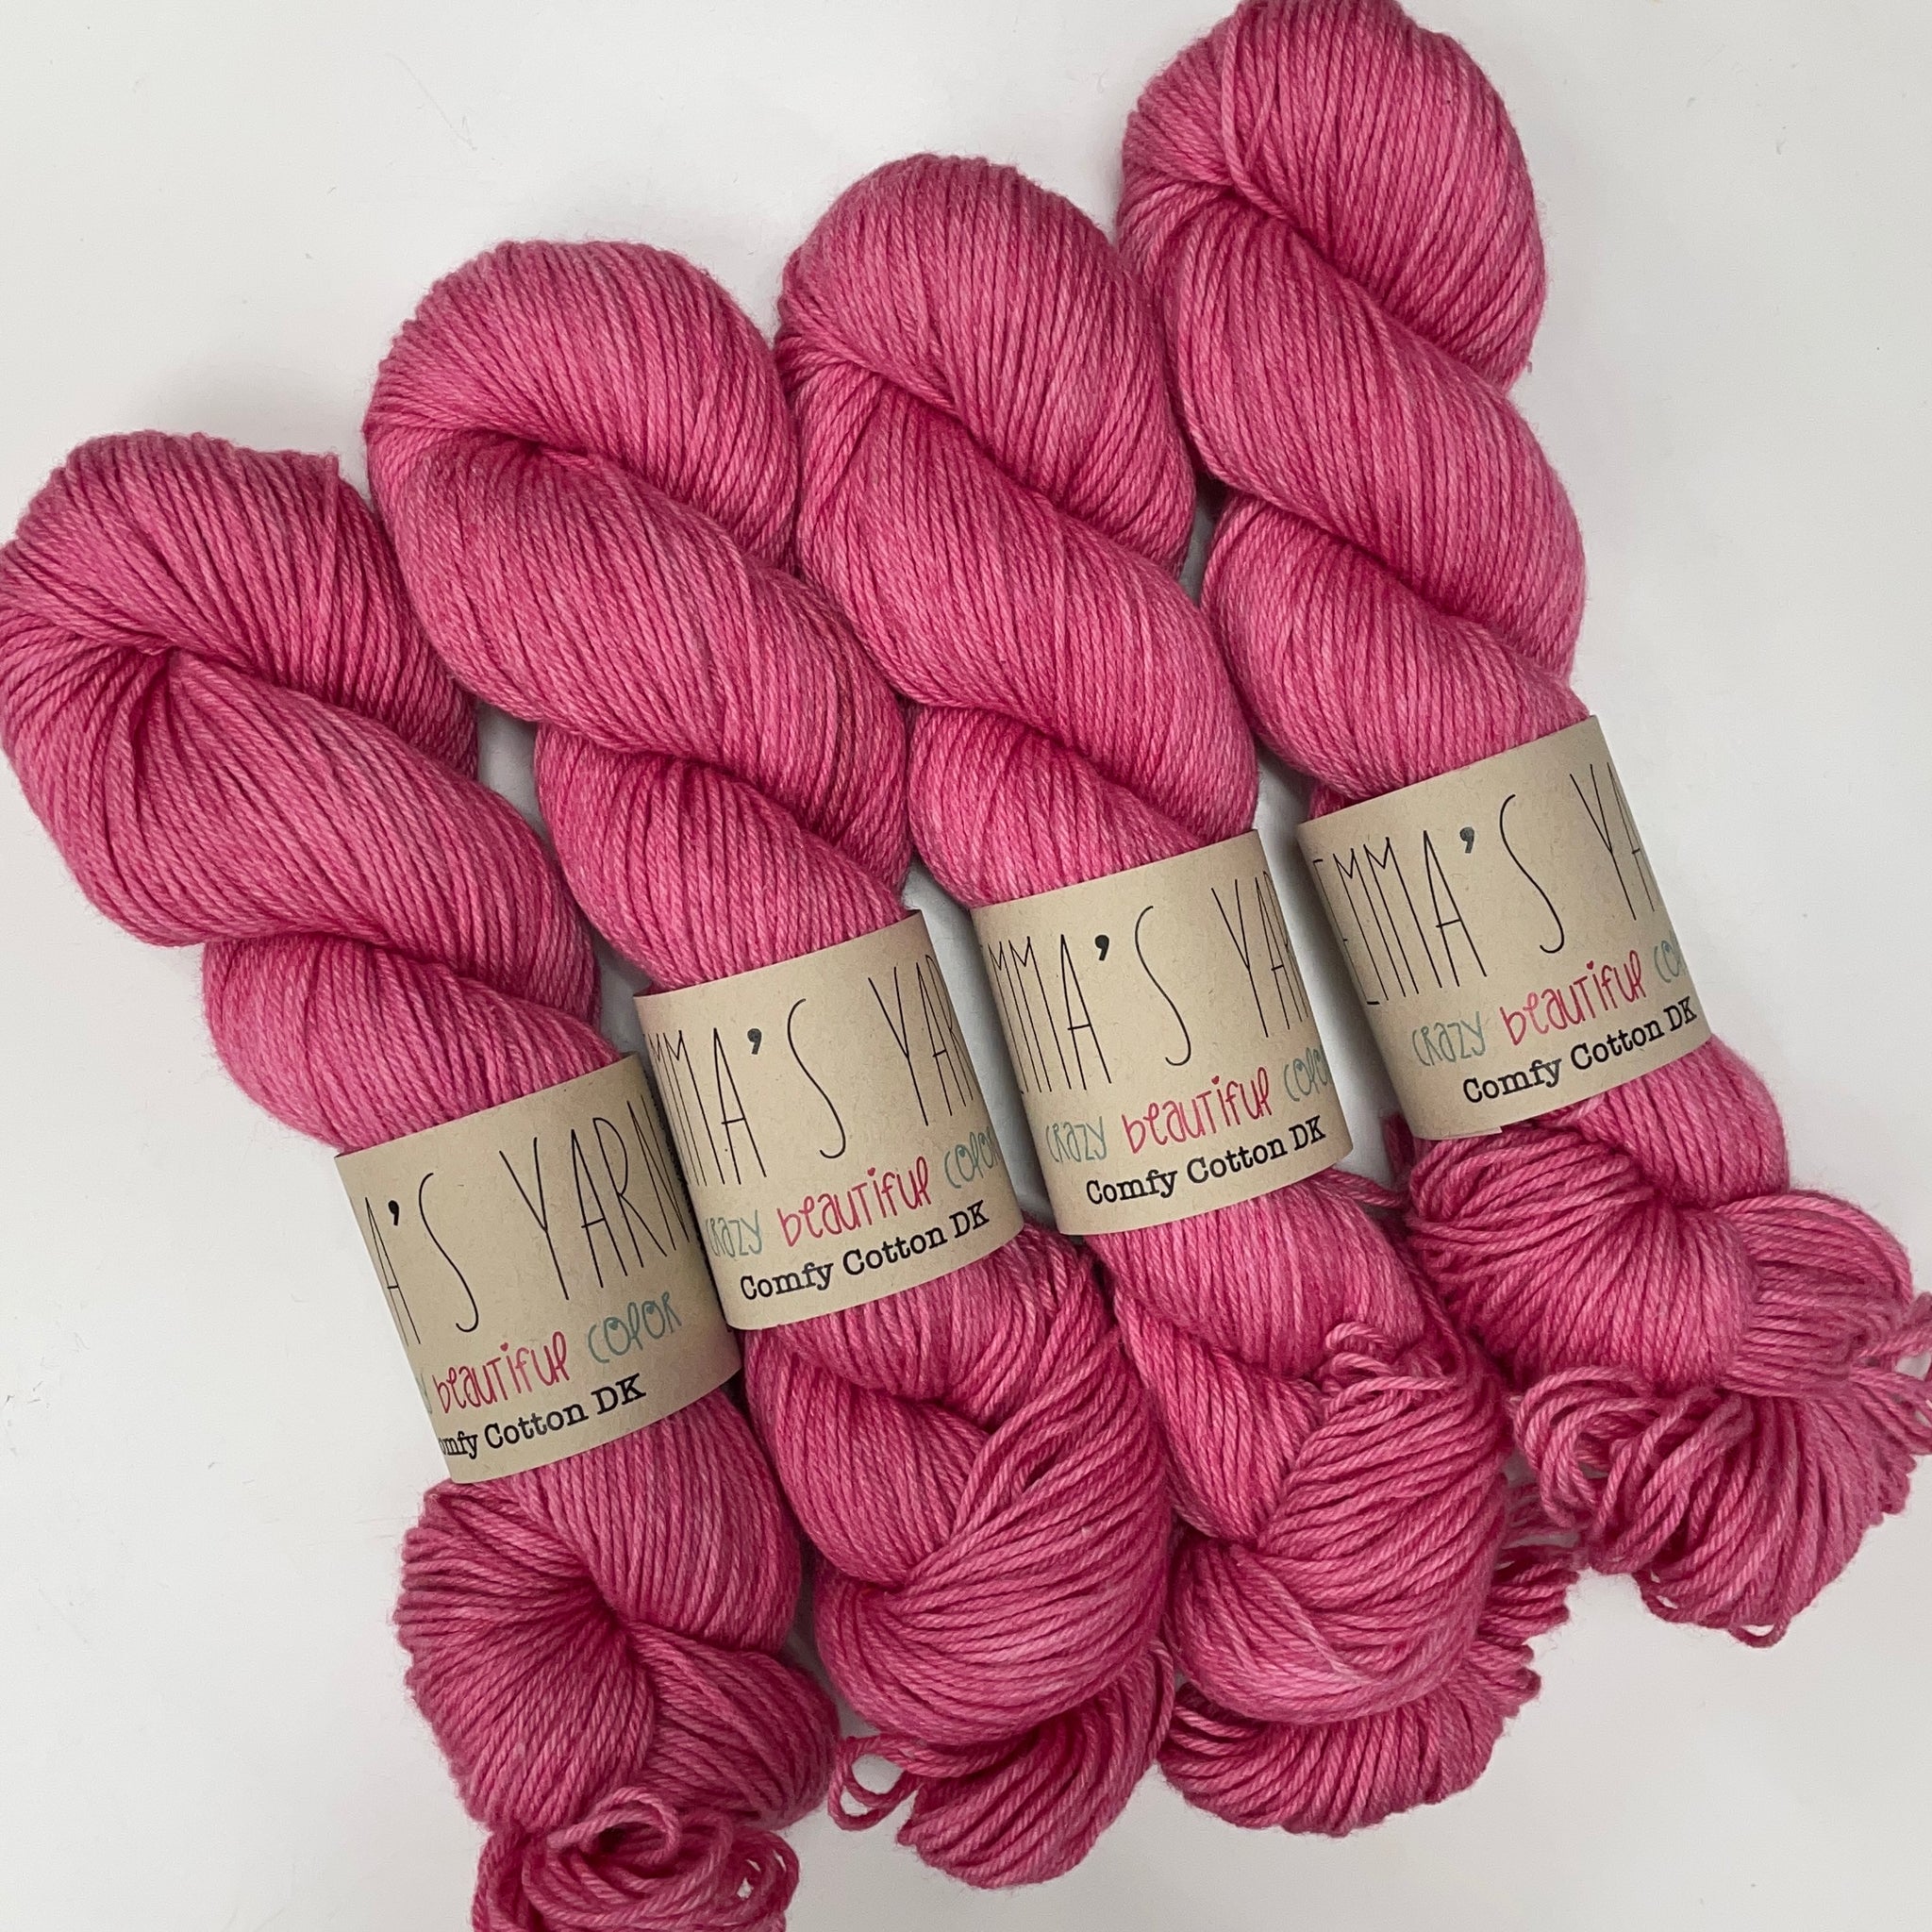 Very Berry - Comfy Cotton DK